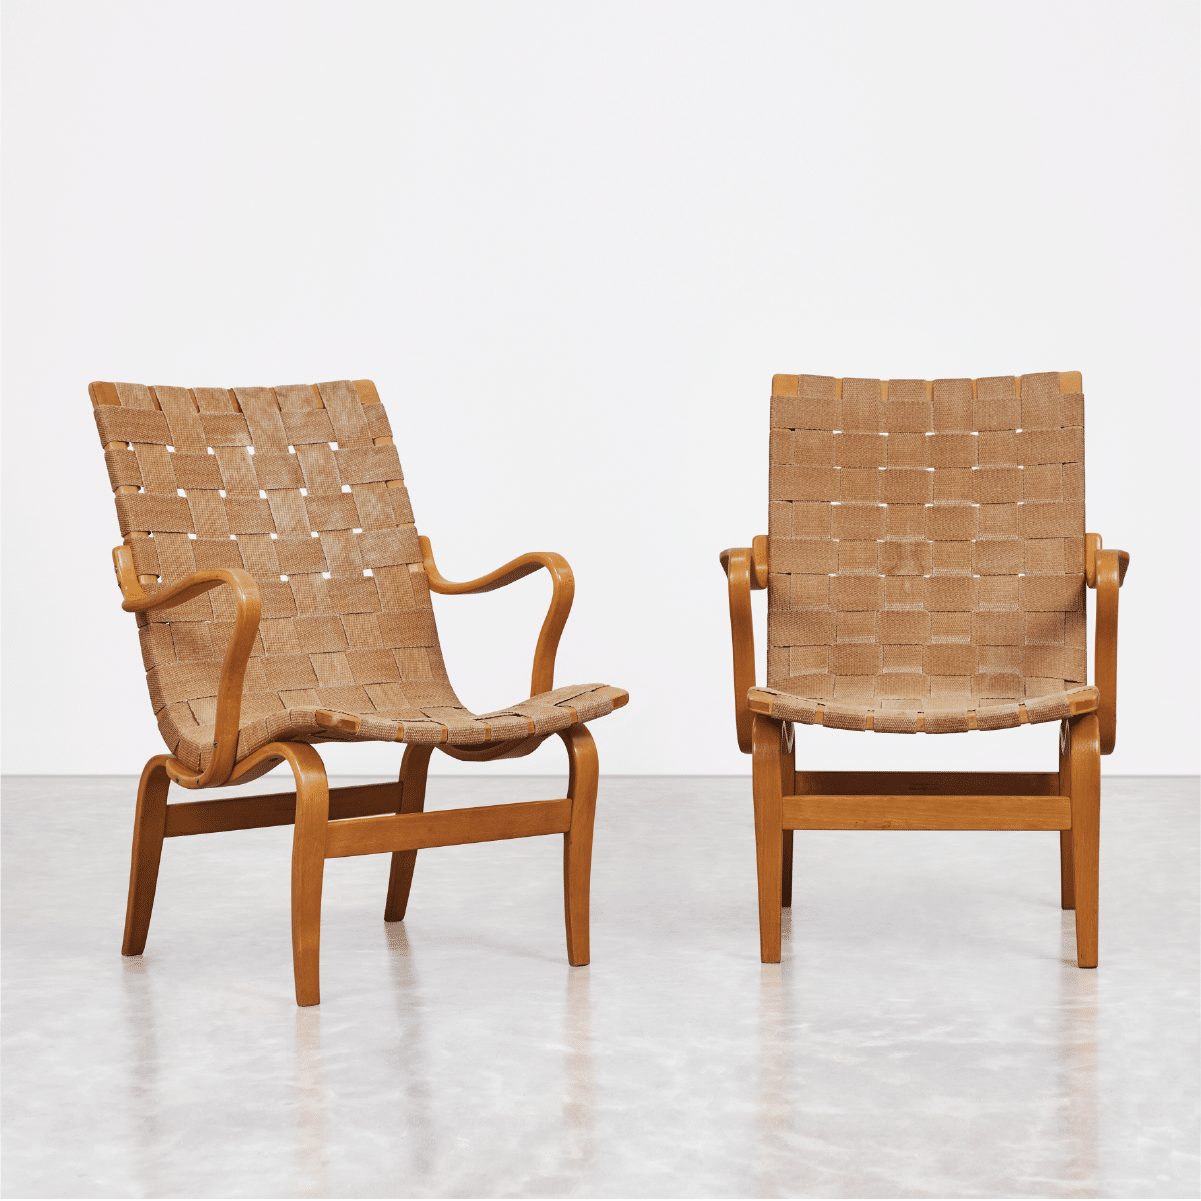 Low res for web_Pair of ‘Eva Hög’ Chairs